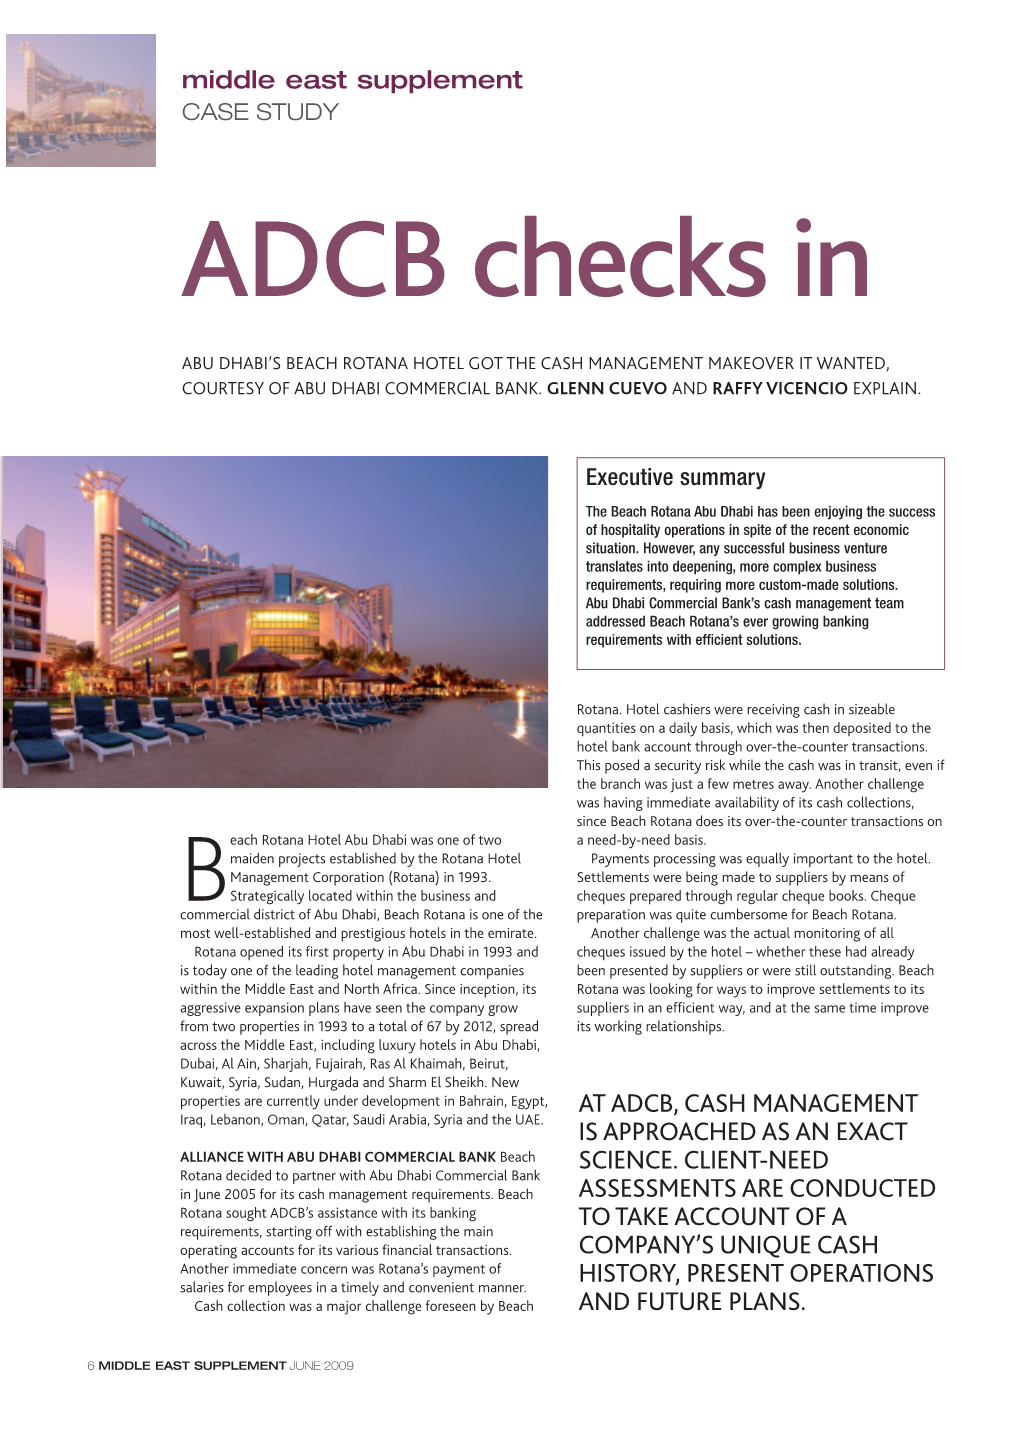 At Adcb, Cash Management Is Approached As an Exact